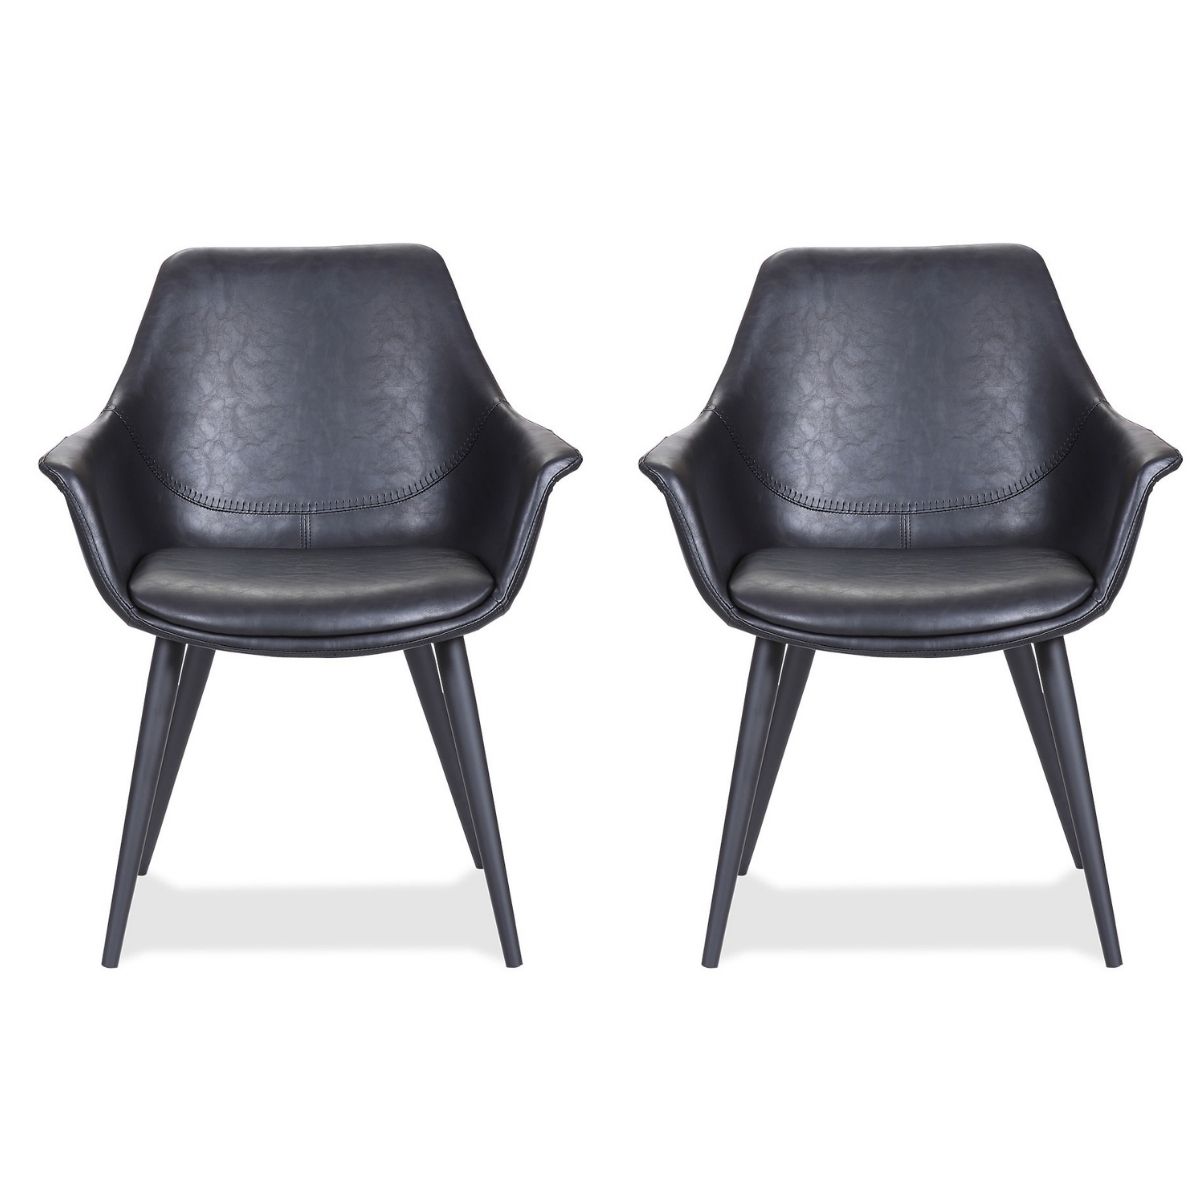 House Of Sander - Set of 2 Signe Chairs - Black (25601)